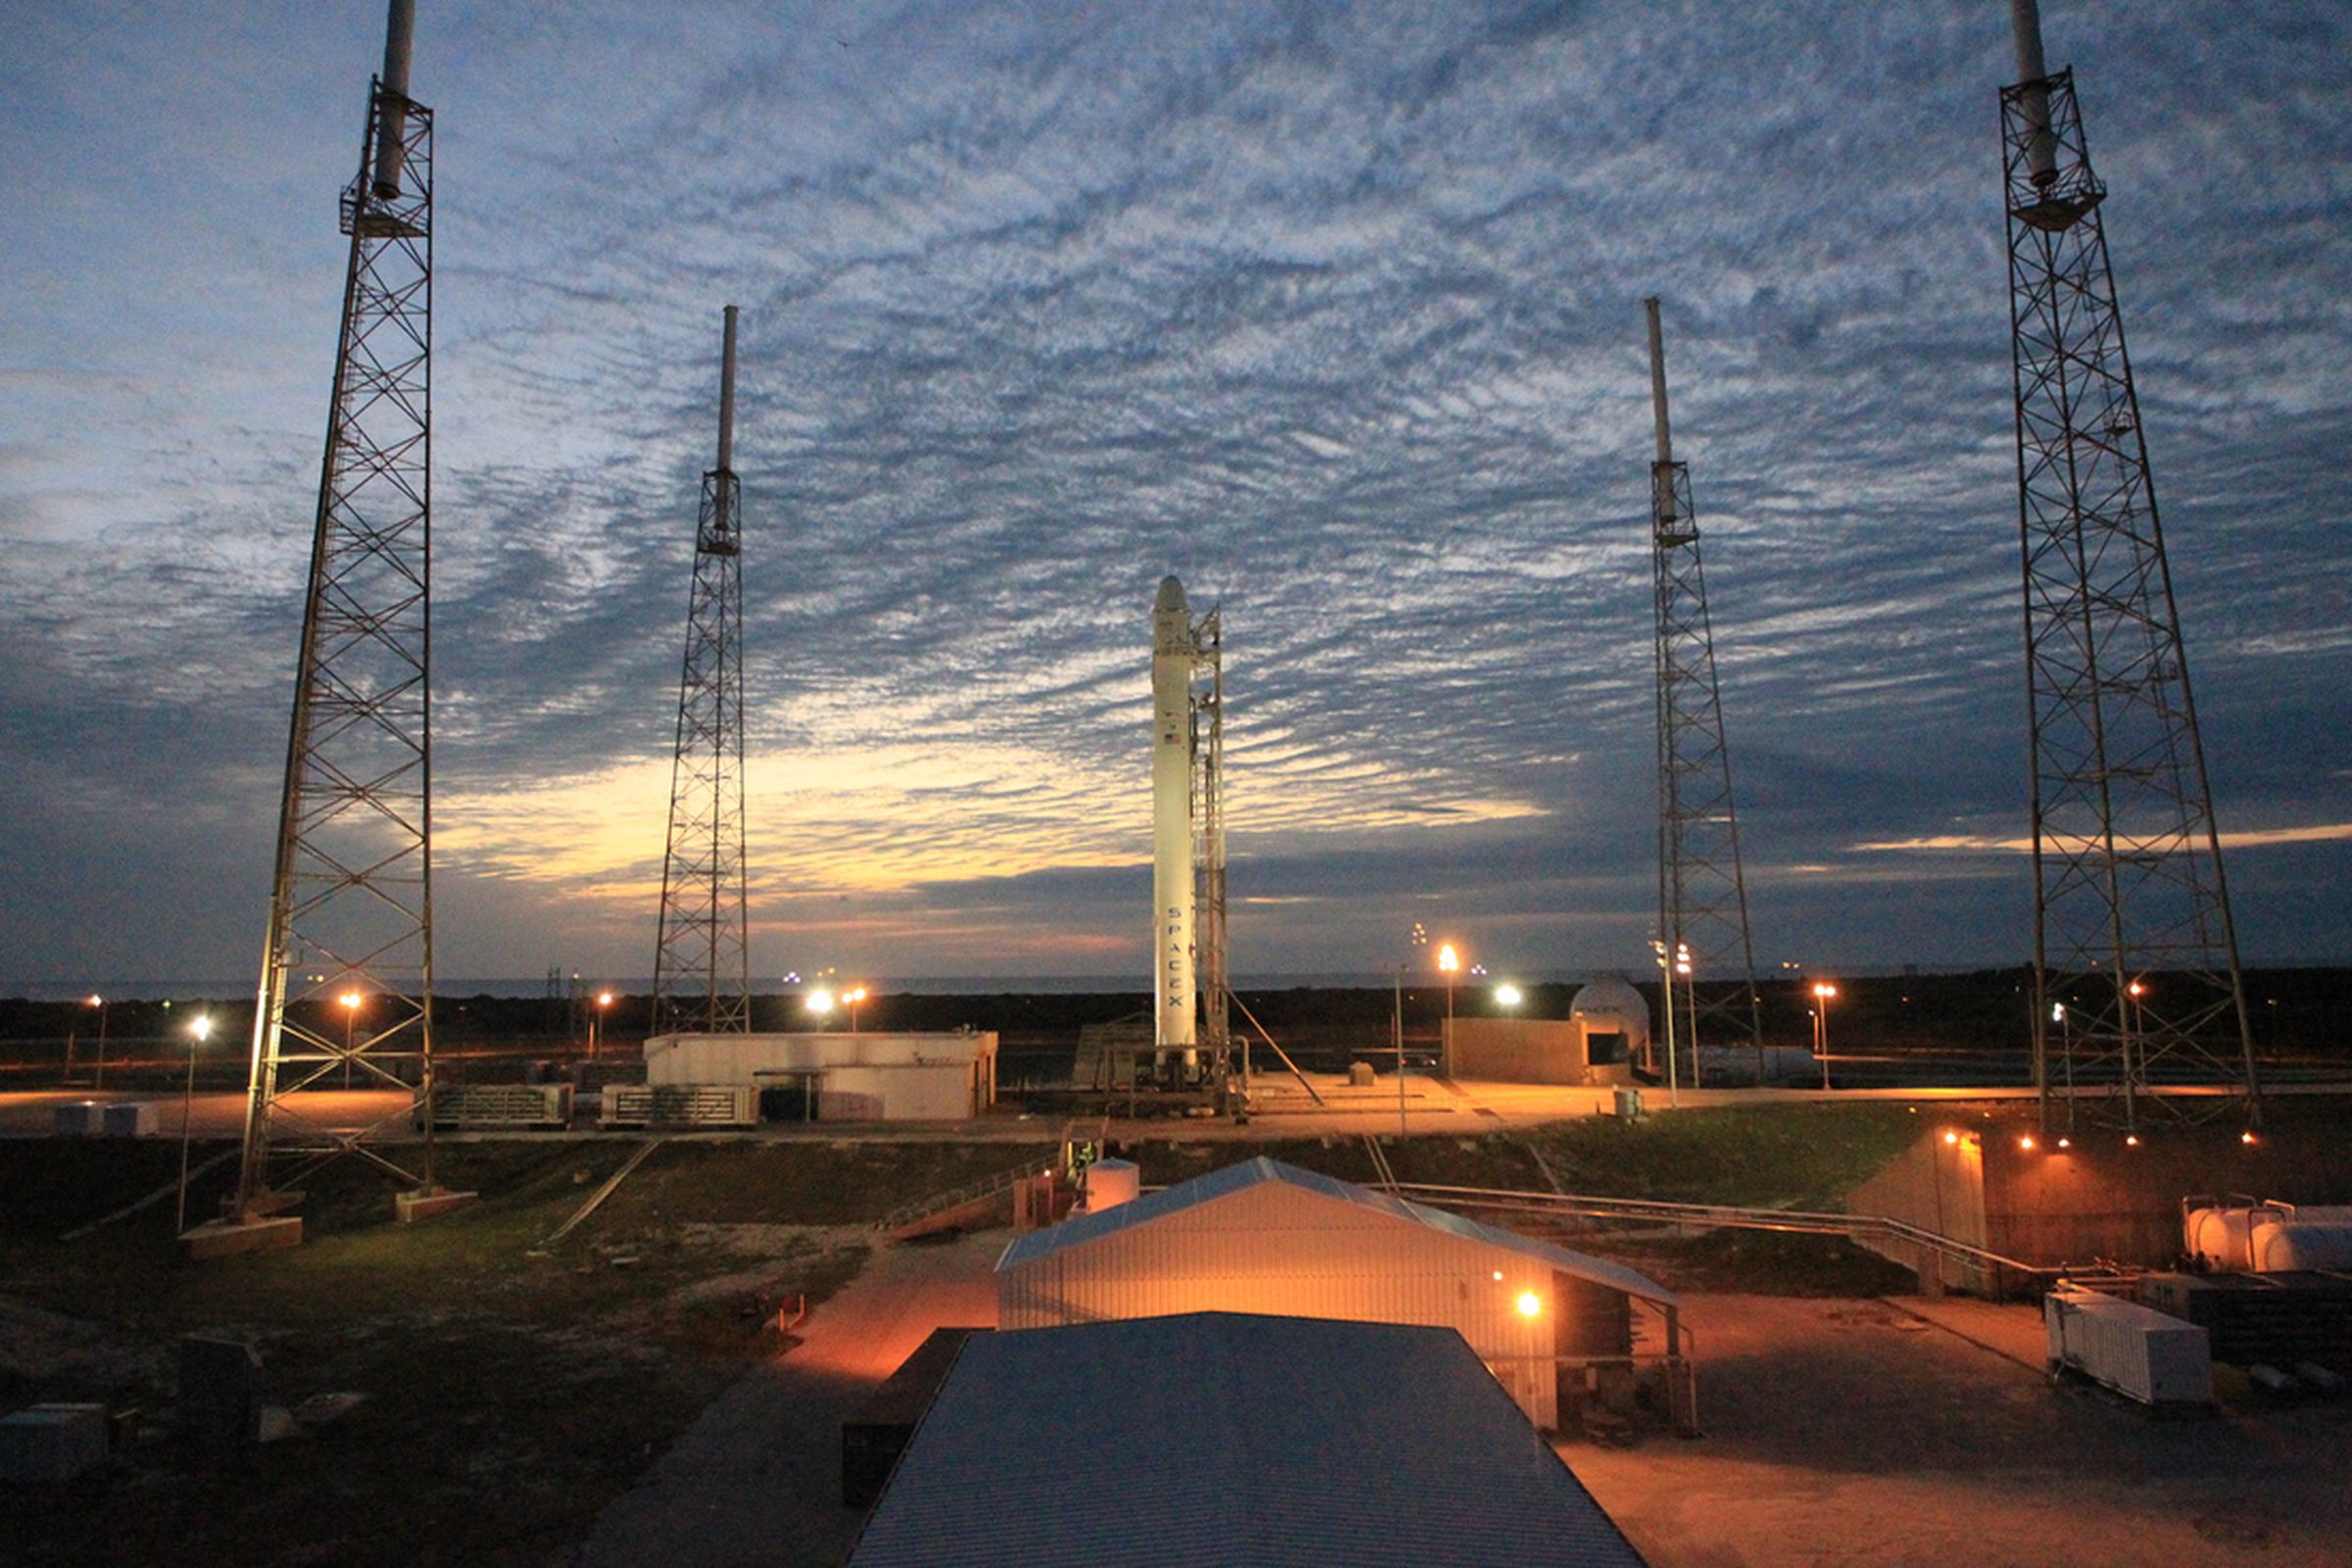 SpaceX on launch pad March 1, 2013